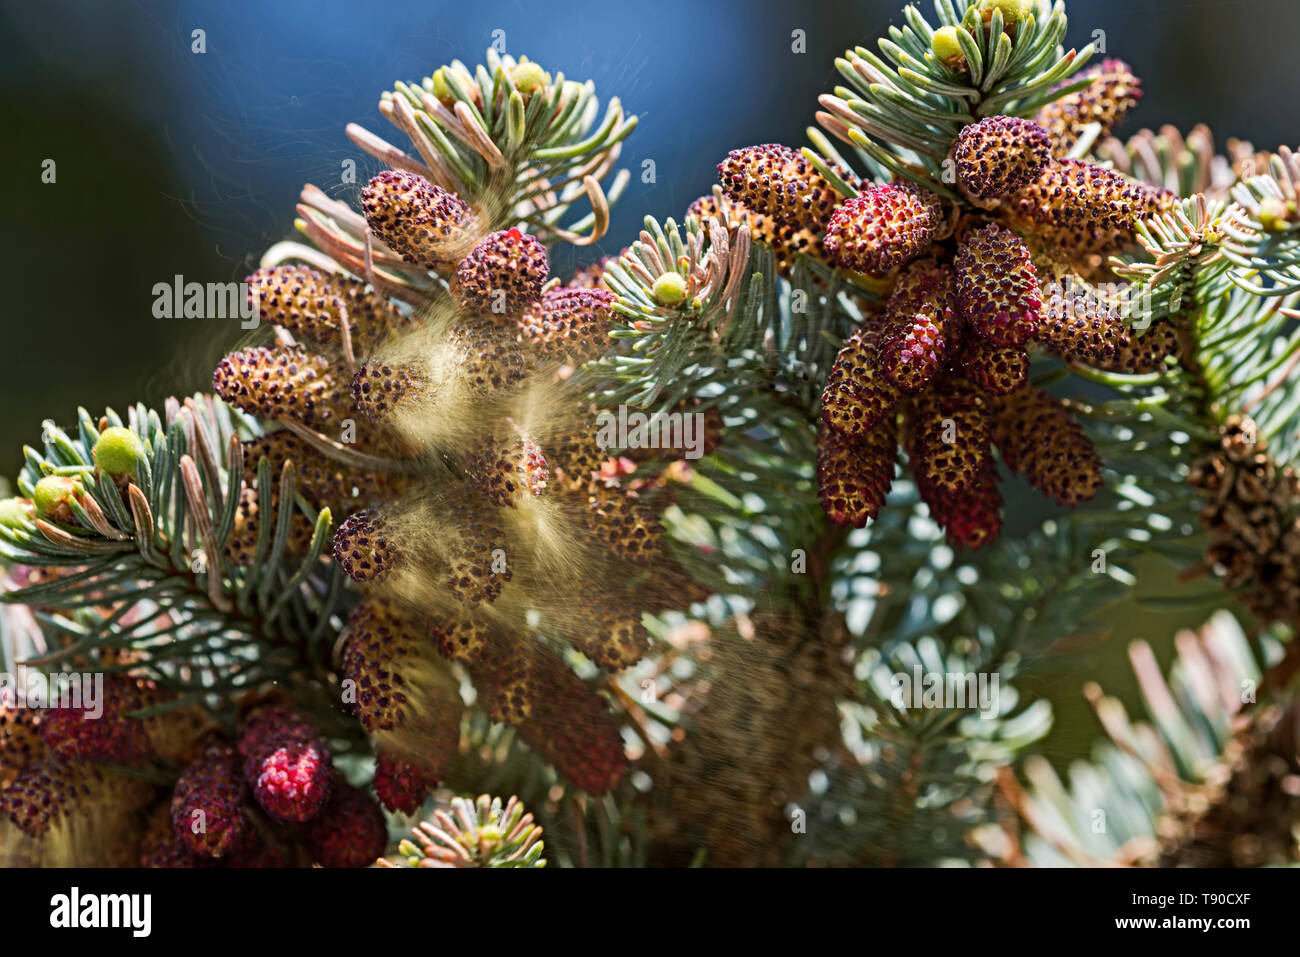 Branches of Abies cephalonica, Greek fir, bearing male flowers in the act of shedding pollen. Stock Photo